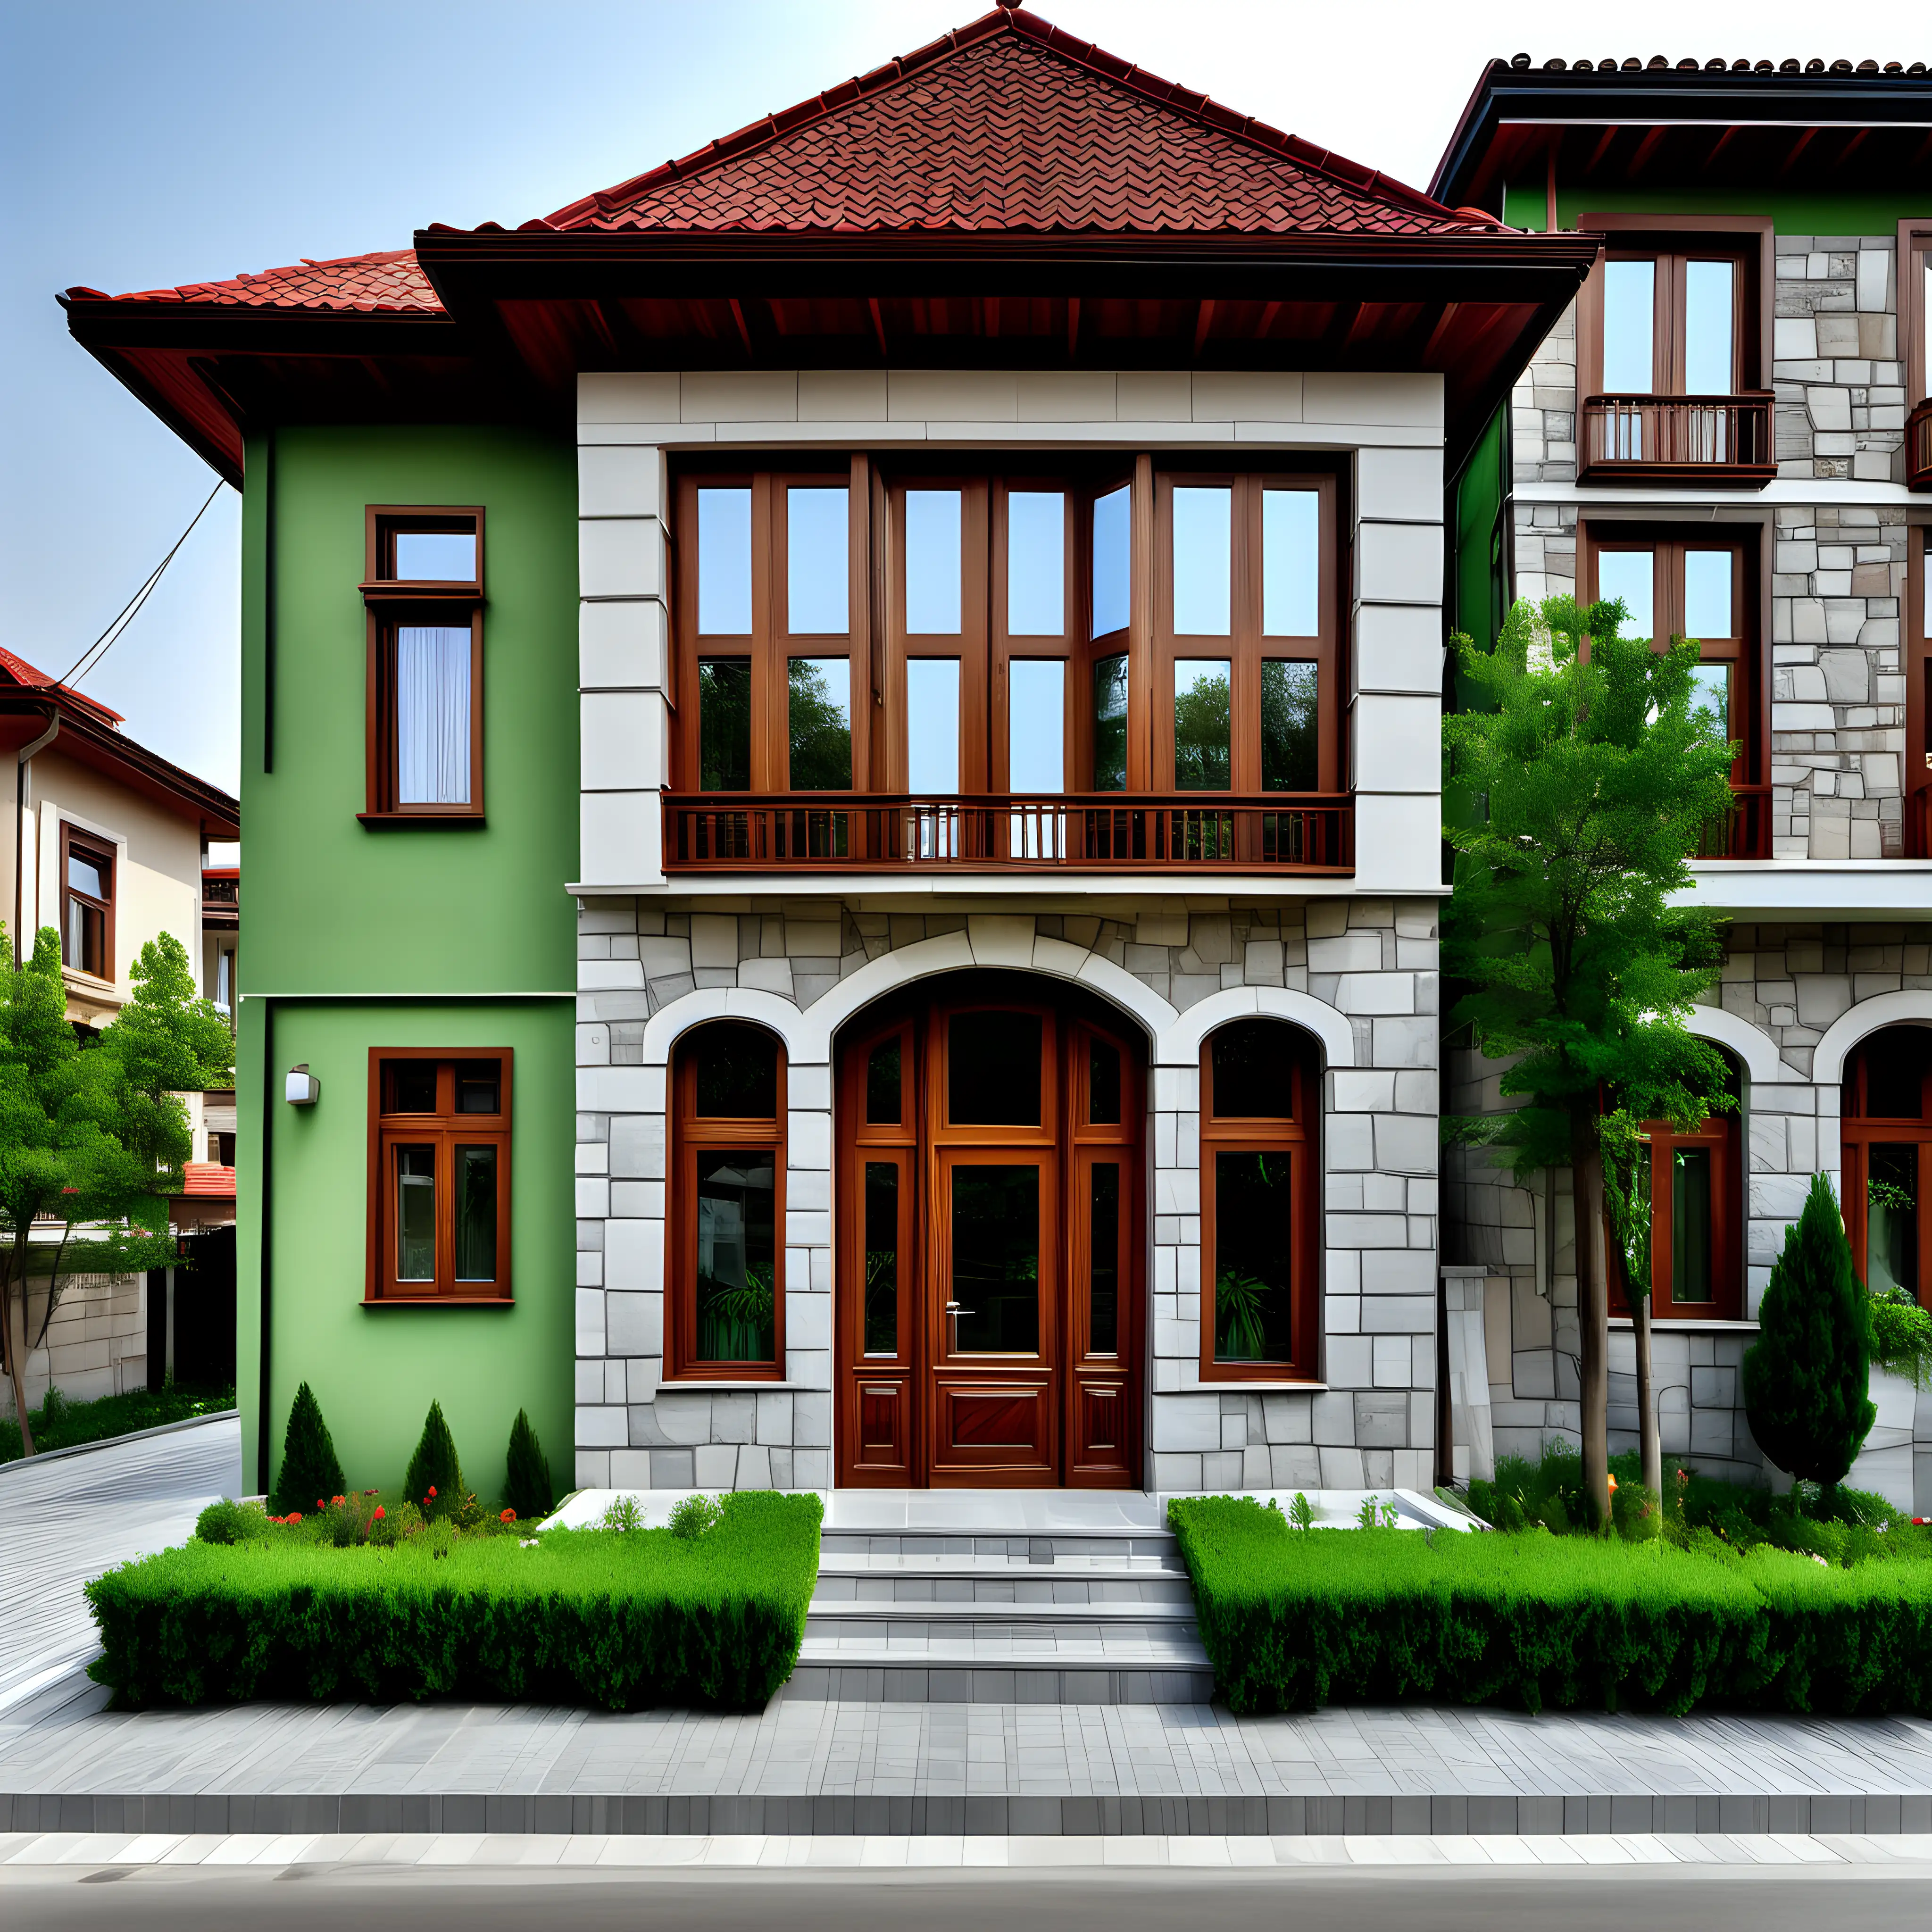 Traditional Turkish Villas with Modern Style on a Green Garden Street